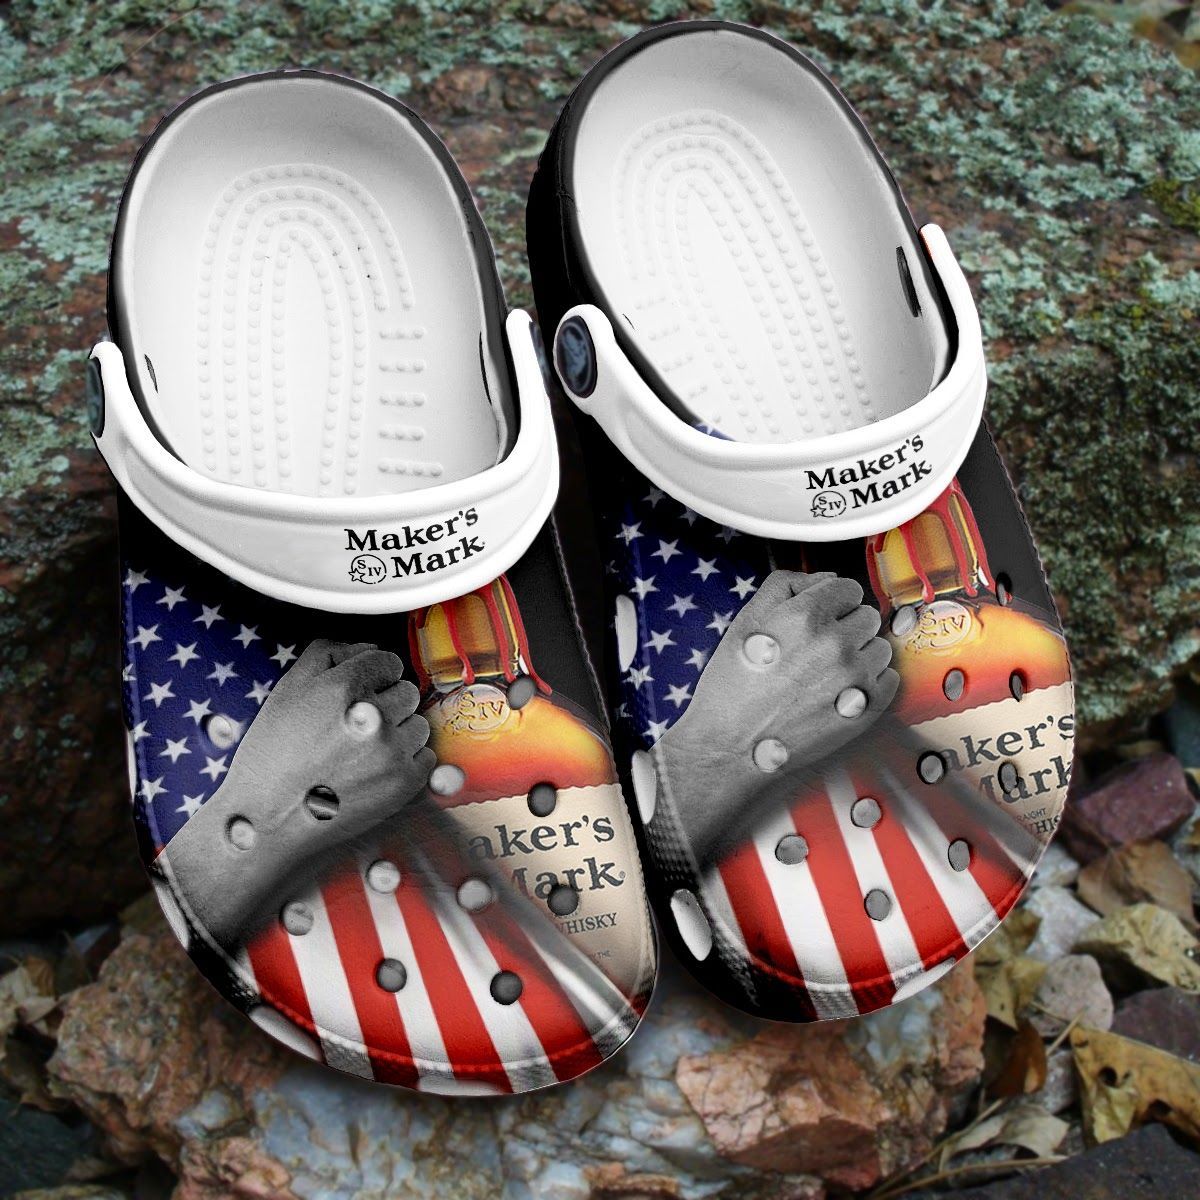 If you'd like to purchase a pair of Crocband Clogs, be sure to check out the official website. 130